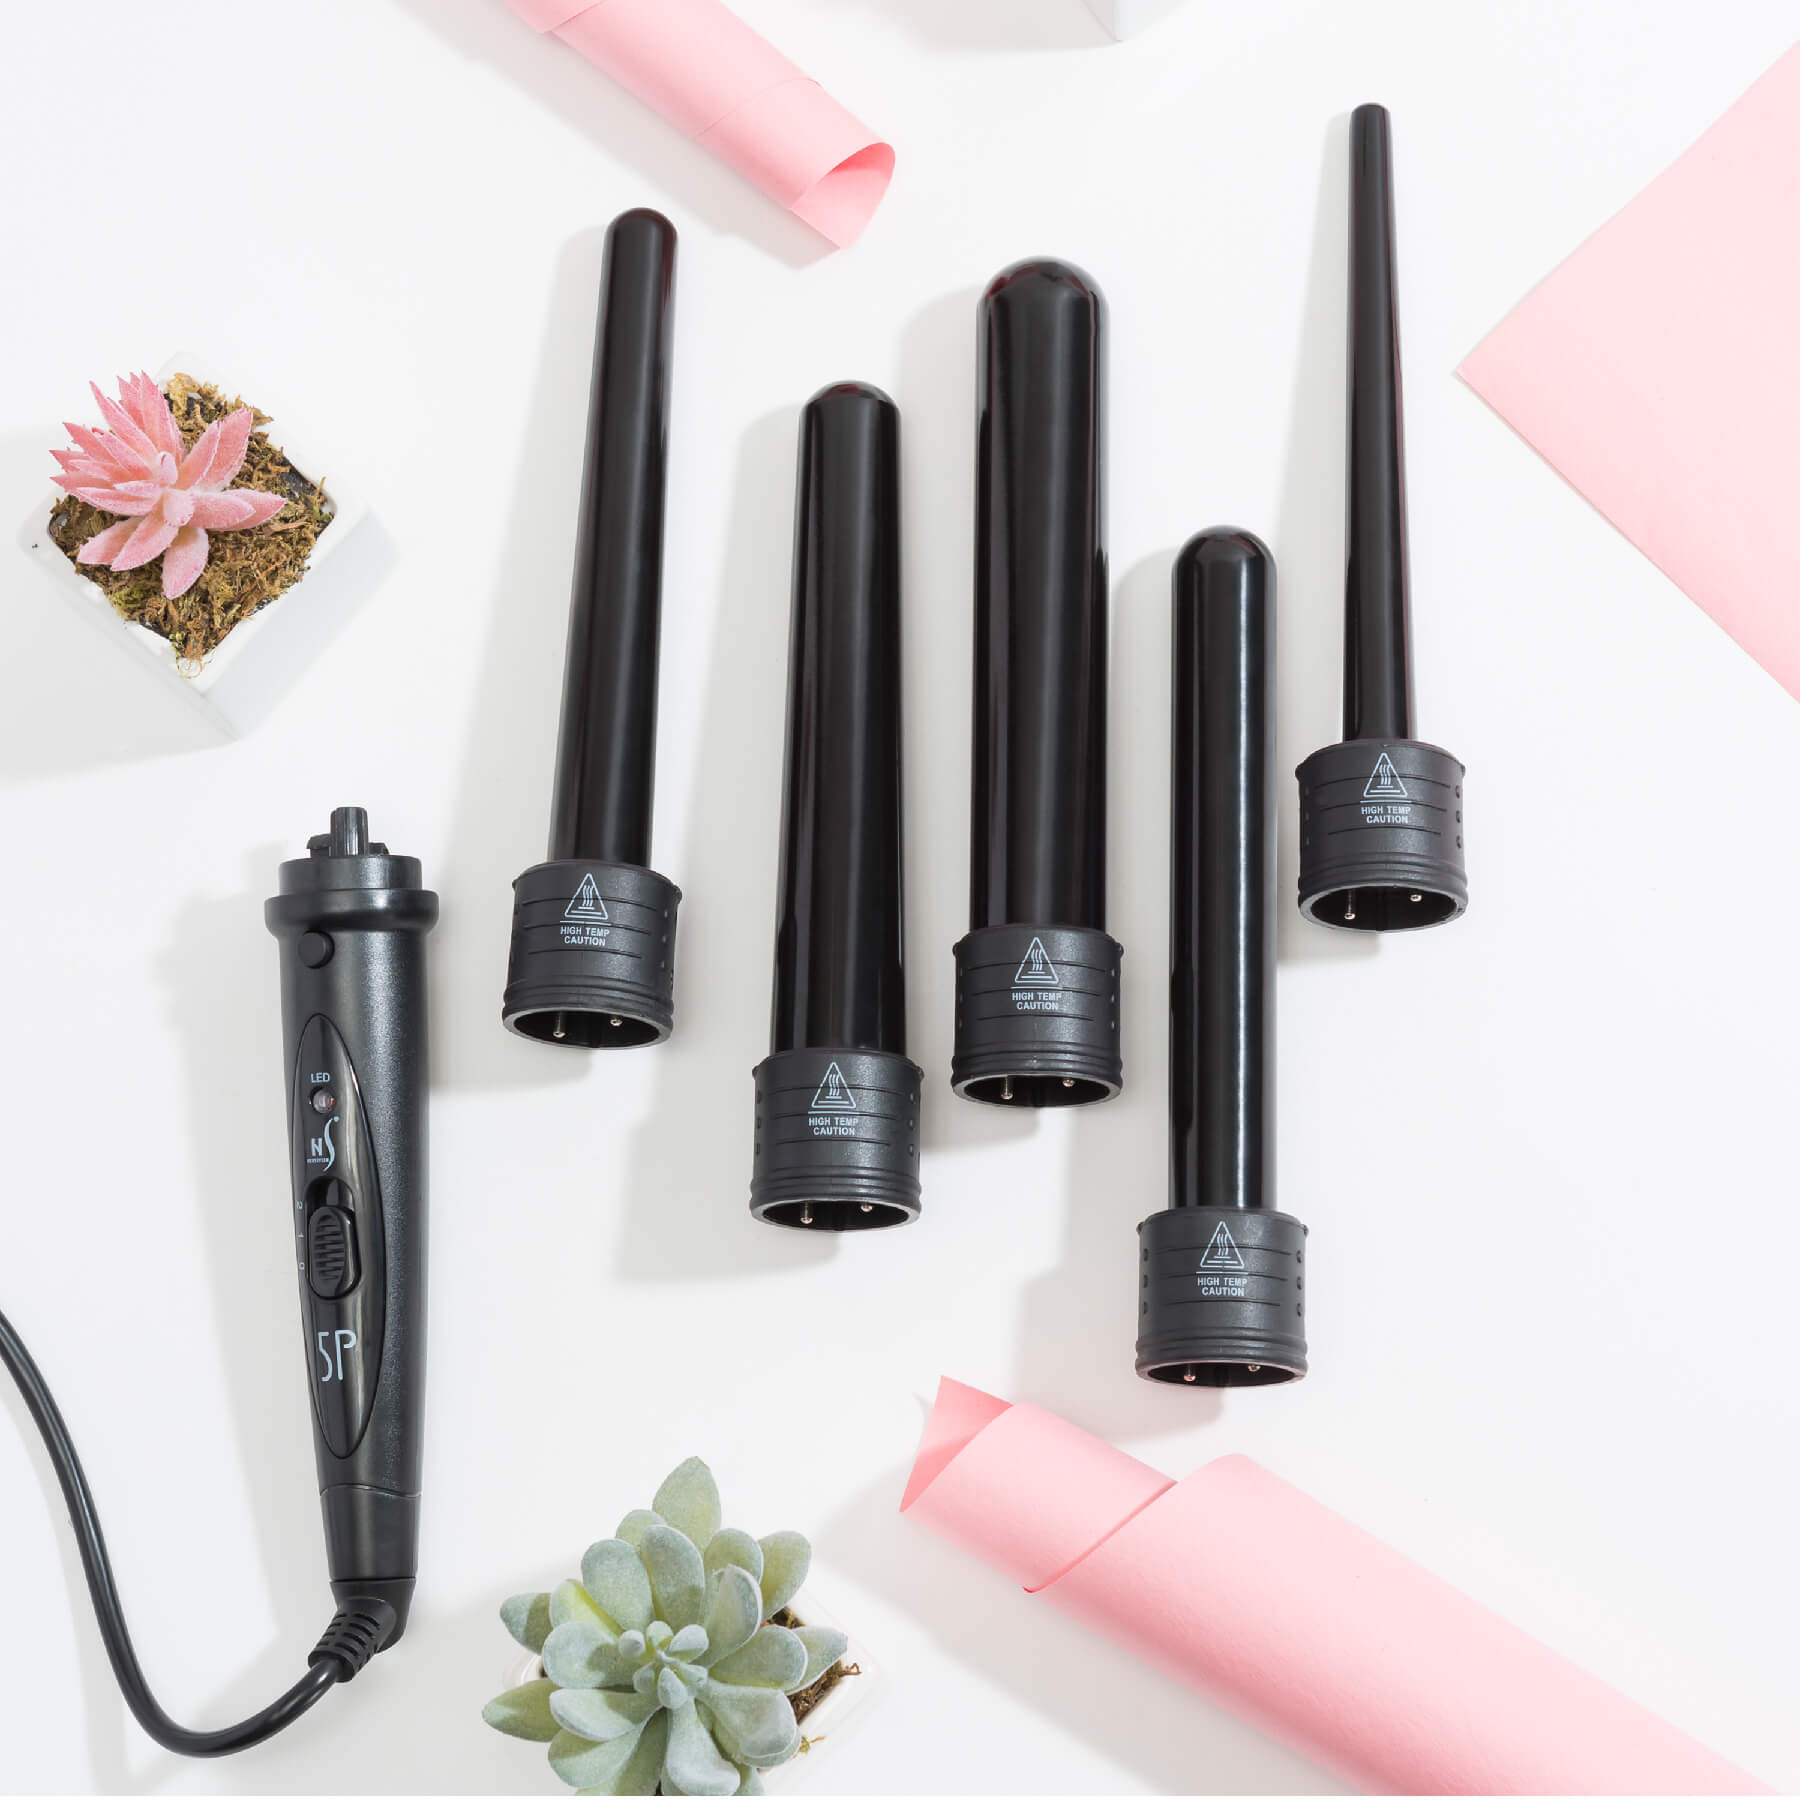 Curling wand from Herstyler